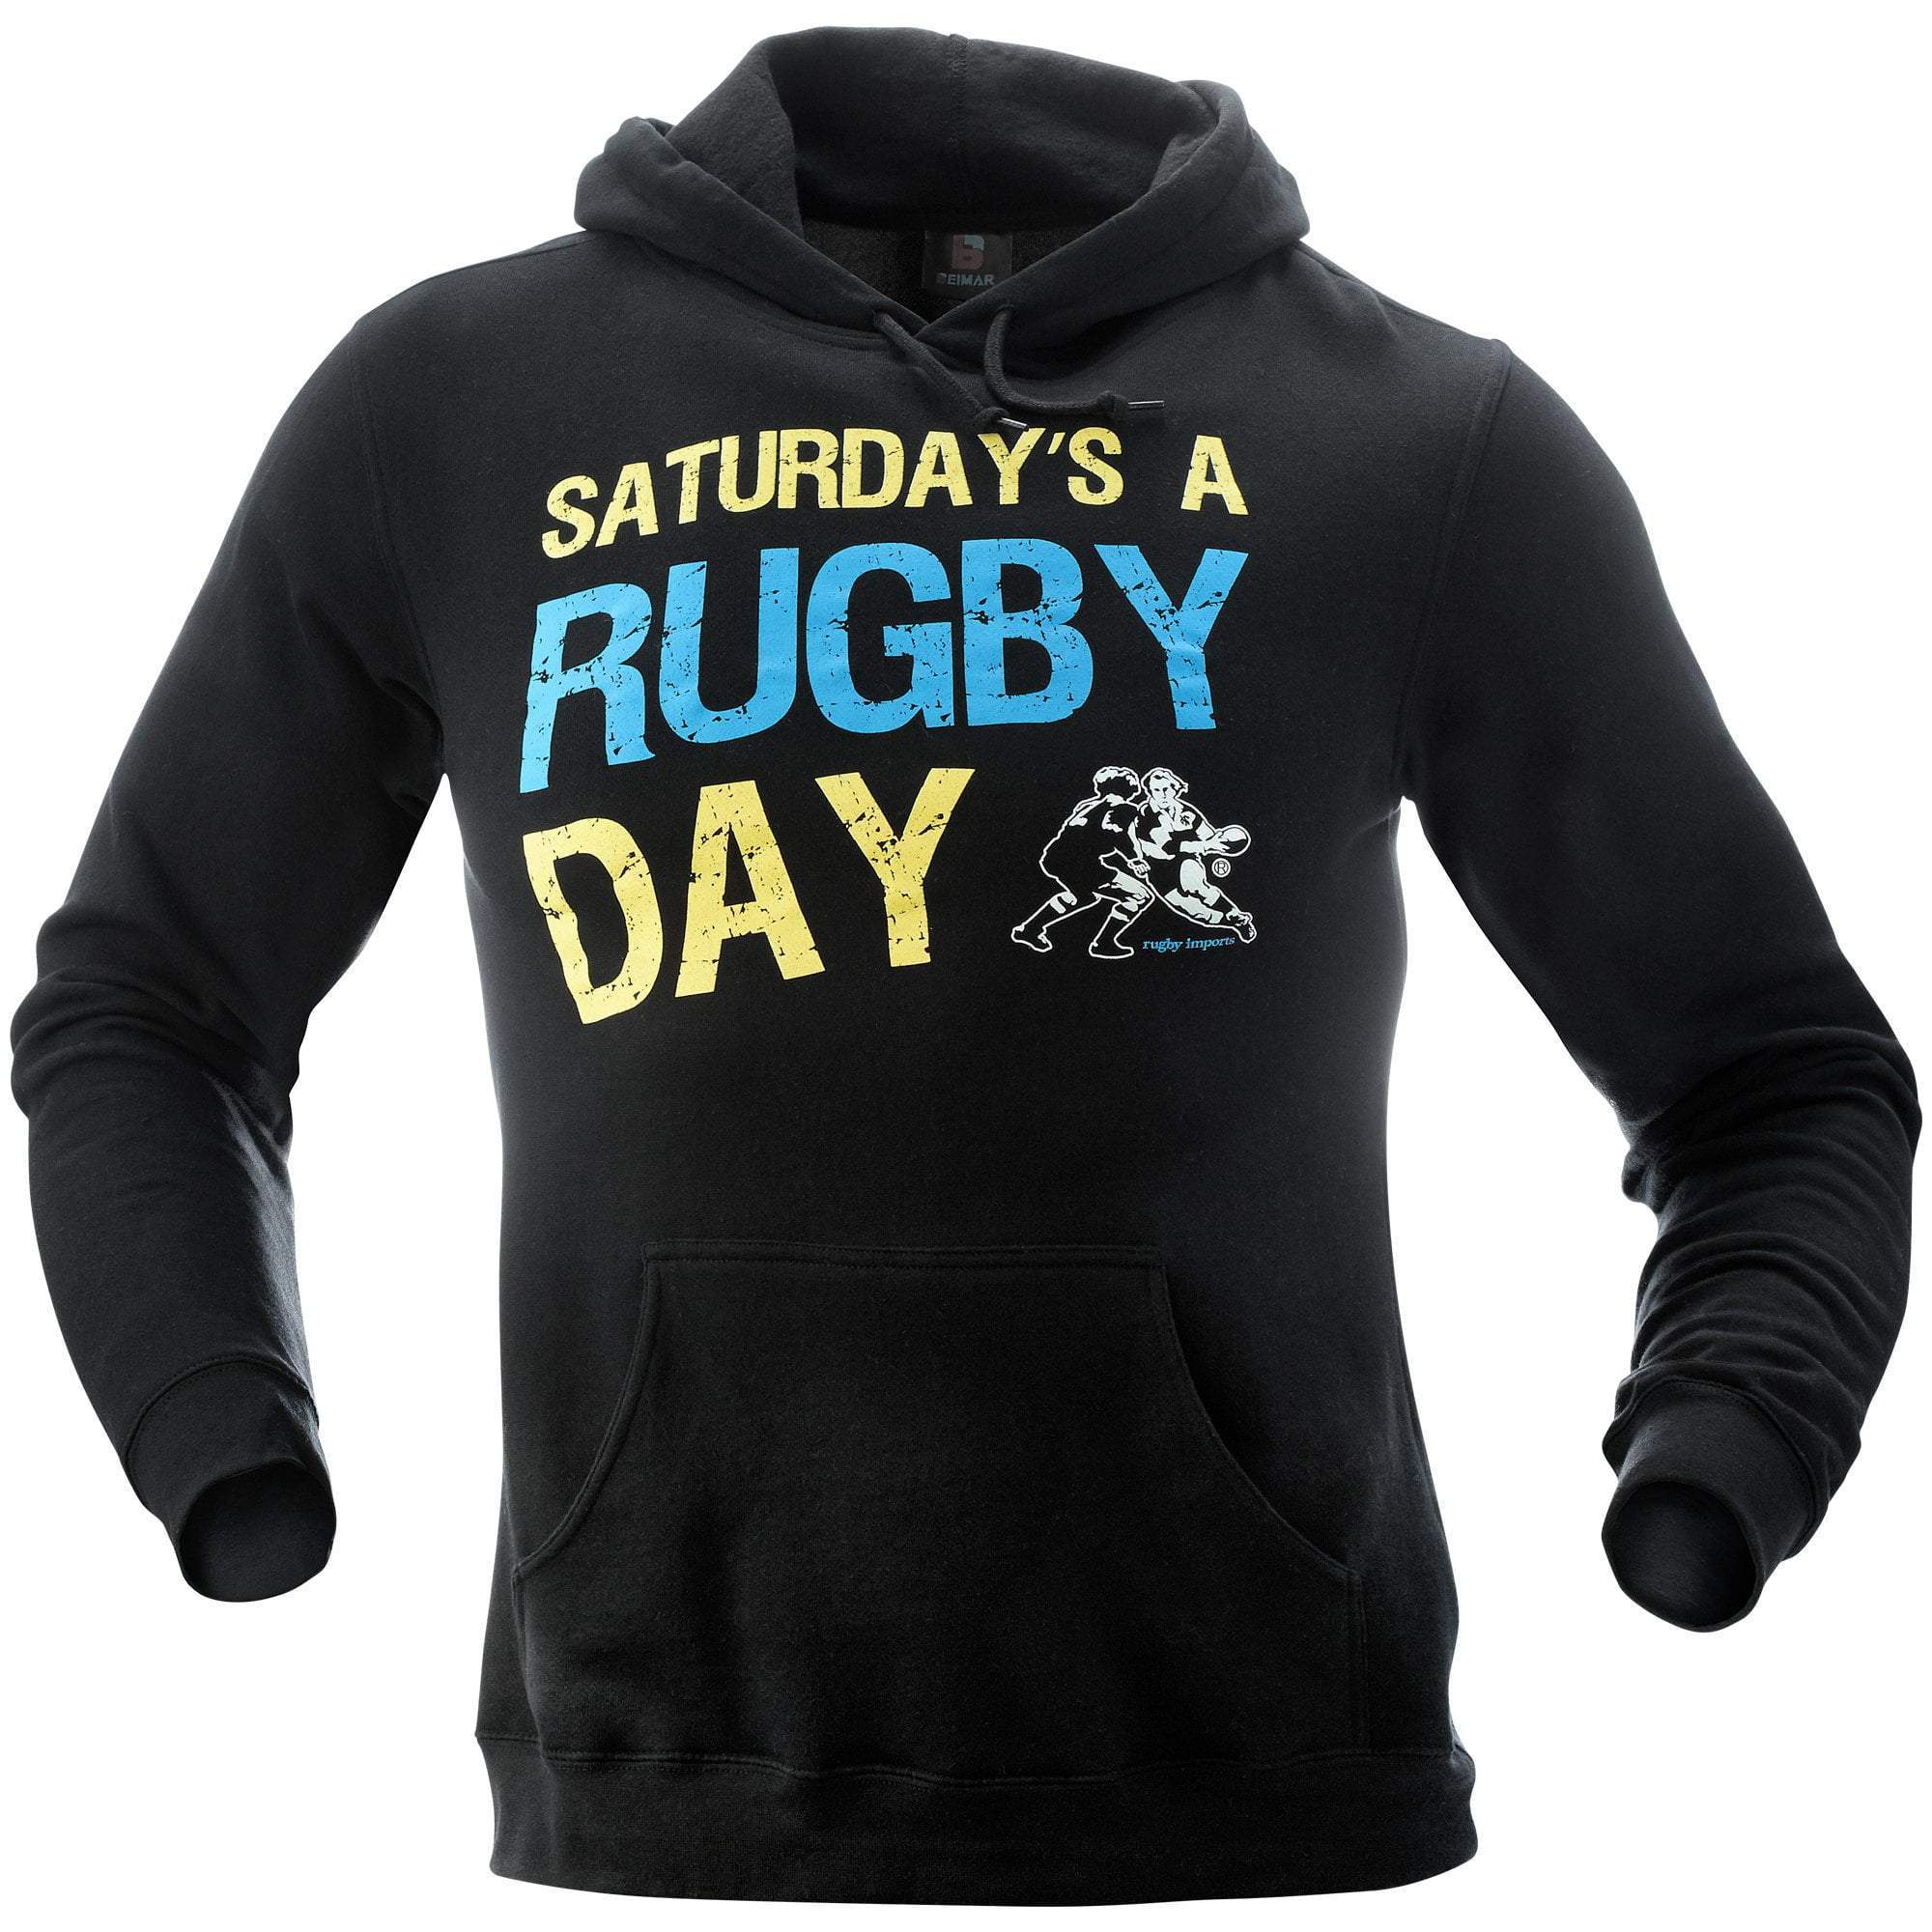 Rugby Imports Saturday's a Rugby Day Lightweight Hoody